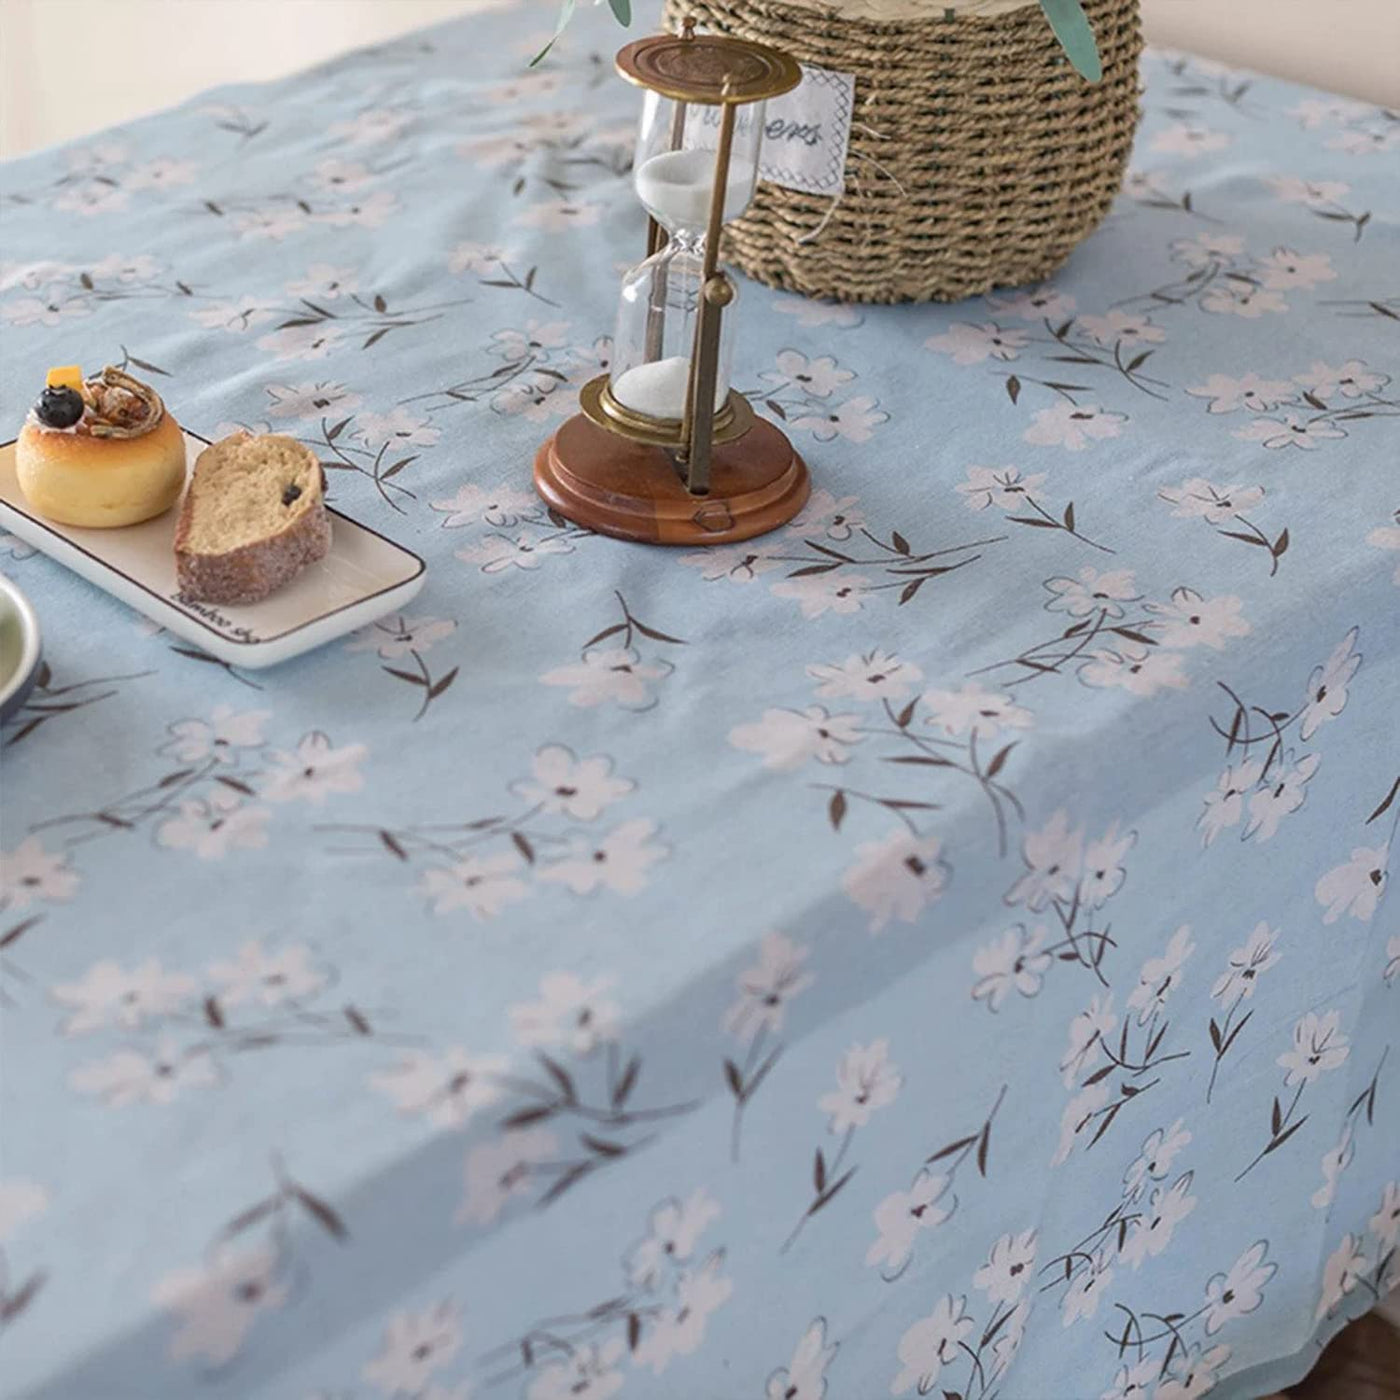 Rectangle Tablecloth Cotton Linen Table Cloth Dust-Proof Table Cover-Blue Daisy